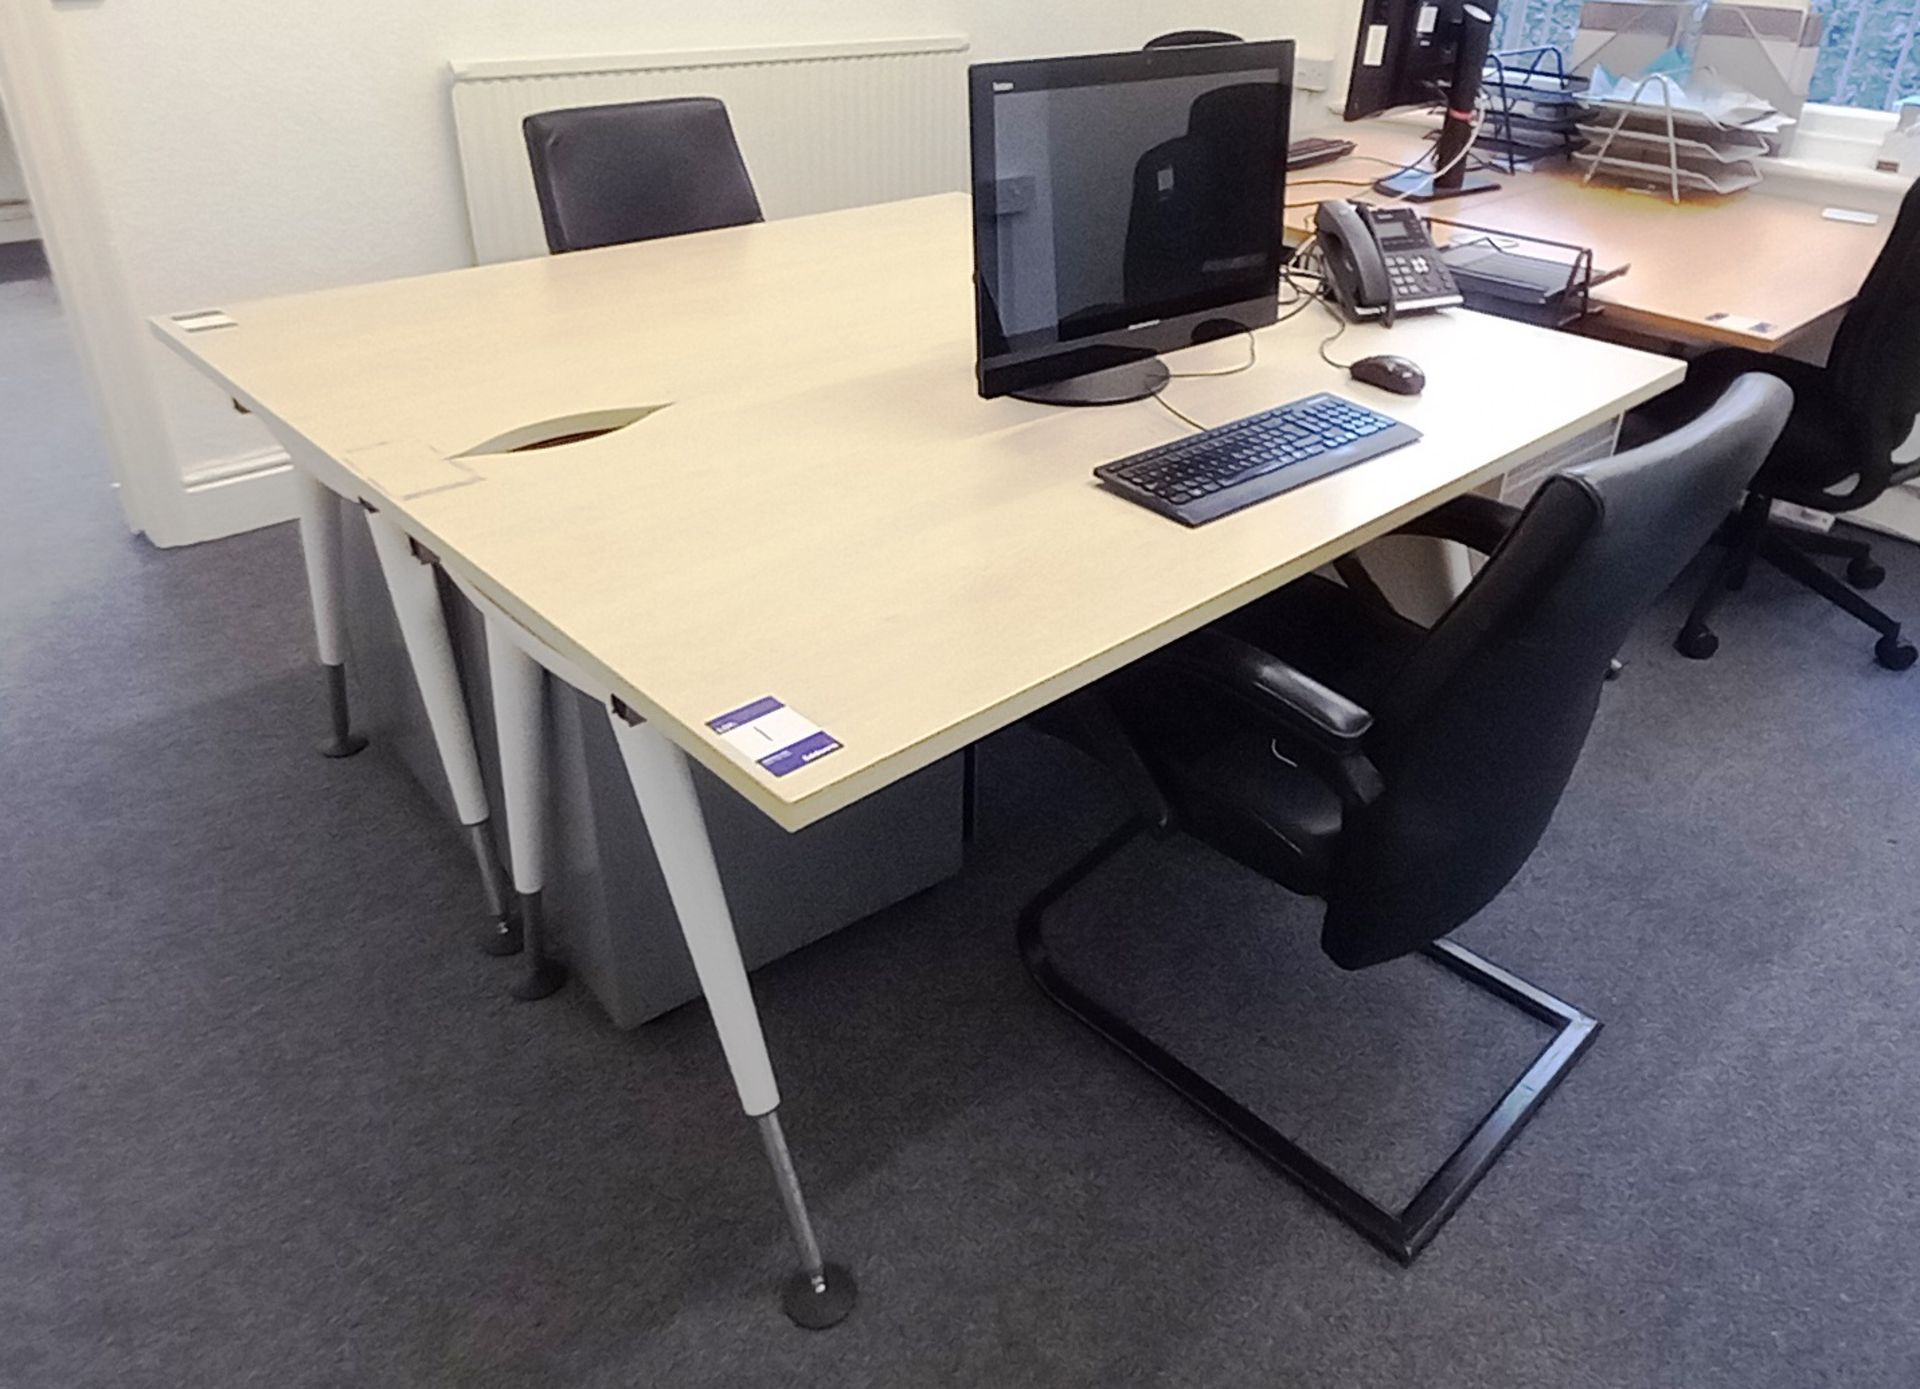 2x Contemporary office desks (1600x800), 2x cantilever leather chairs, 2x mobile pedestals and an